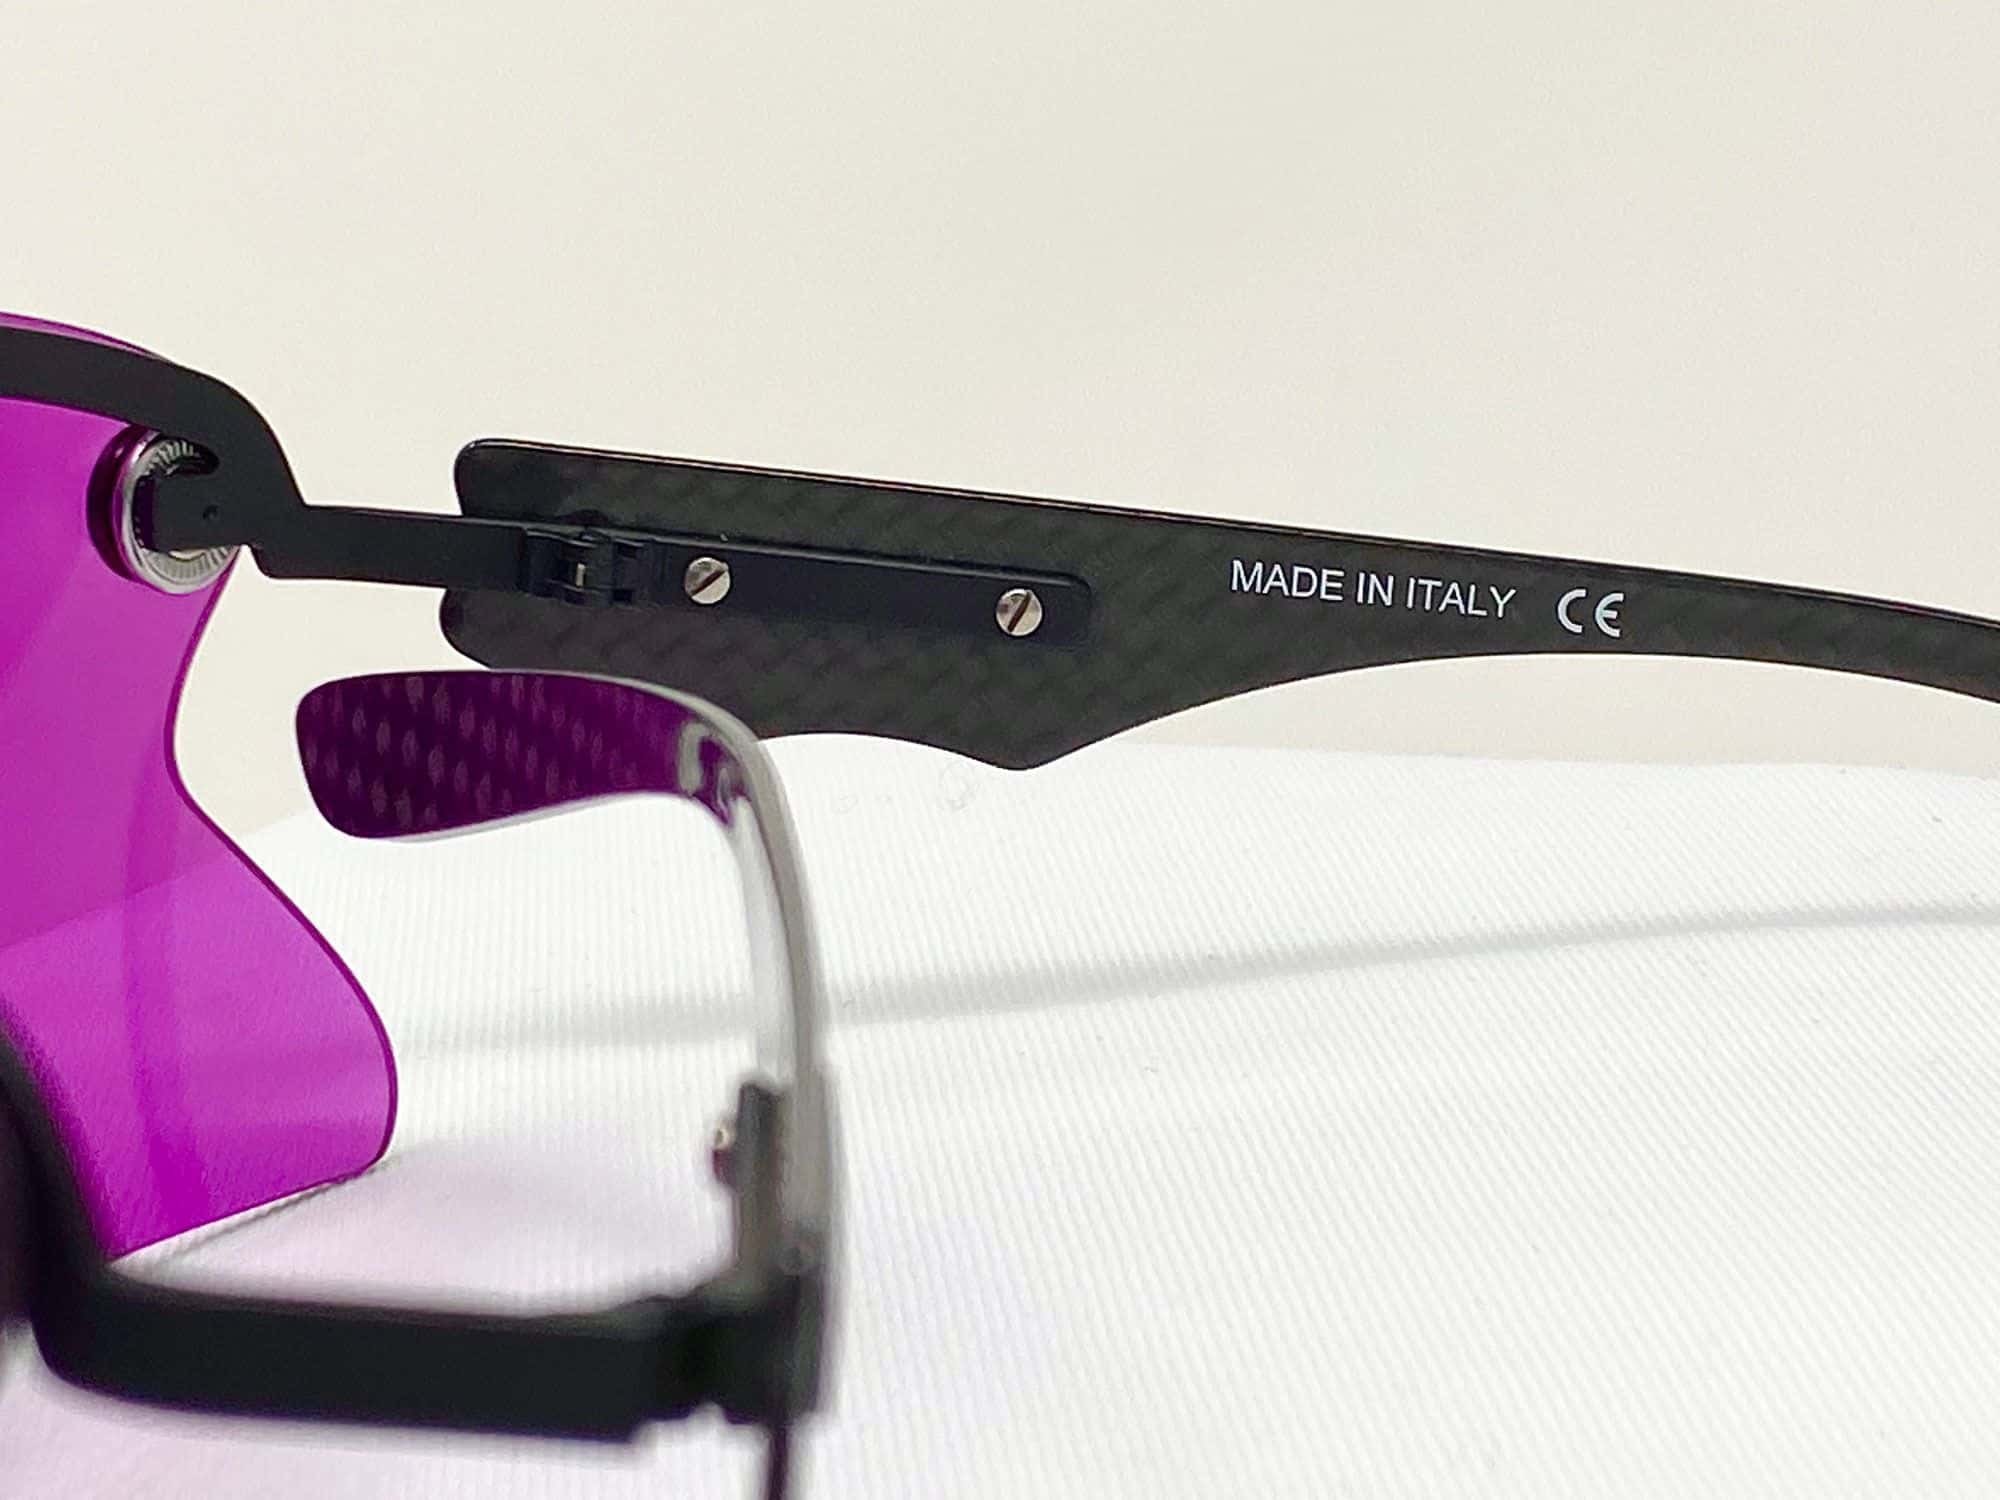 All Castellani shooting glasses, including C-Mask Pro are made in Italy.